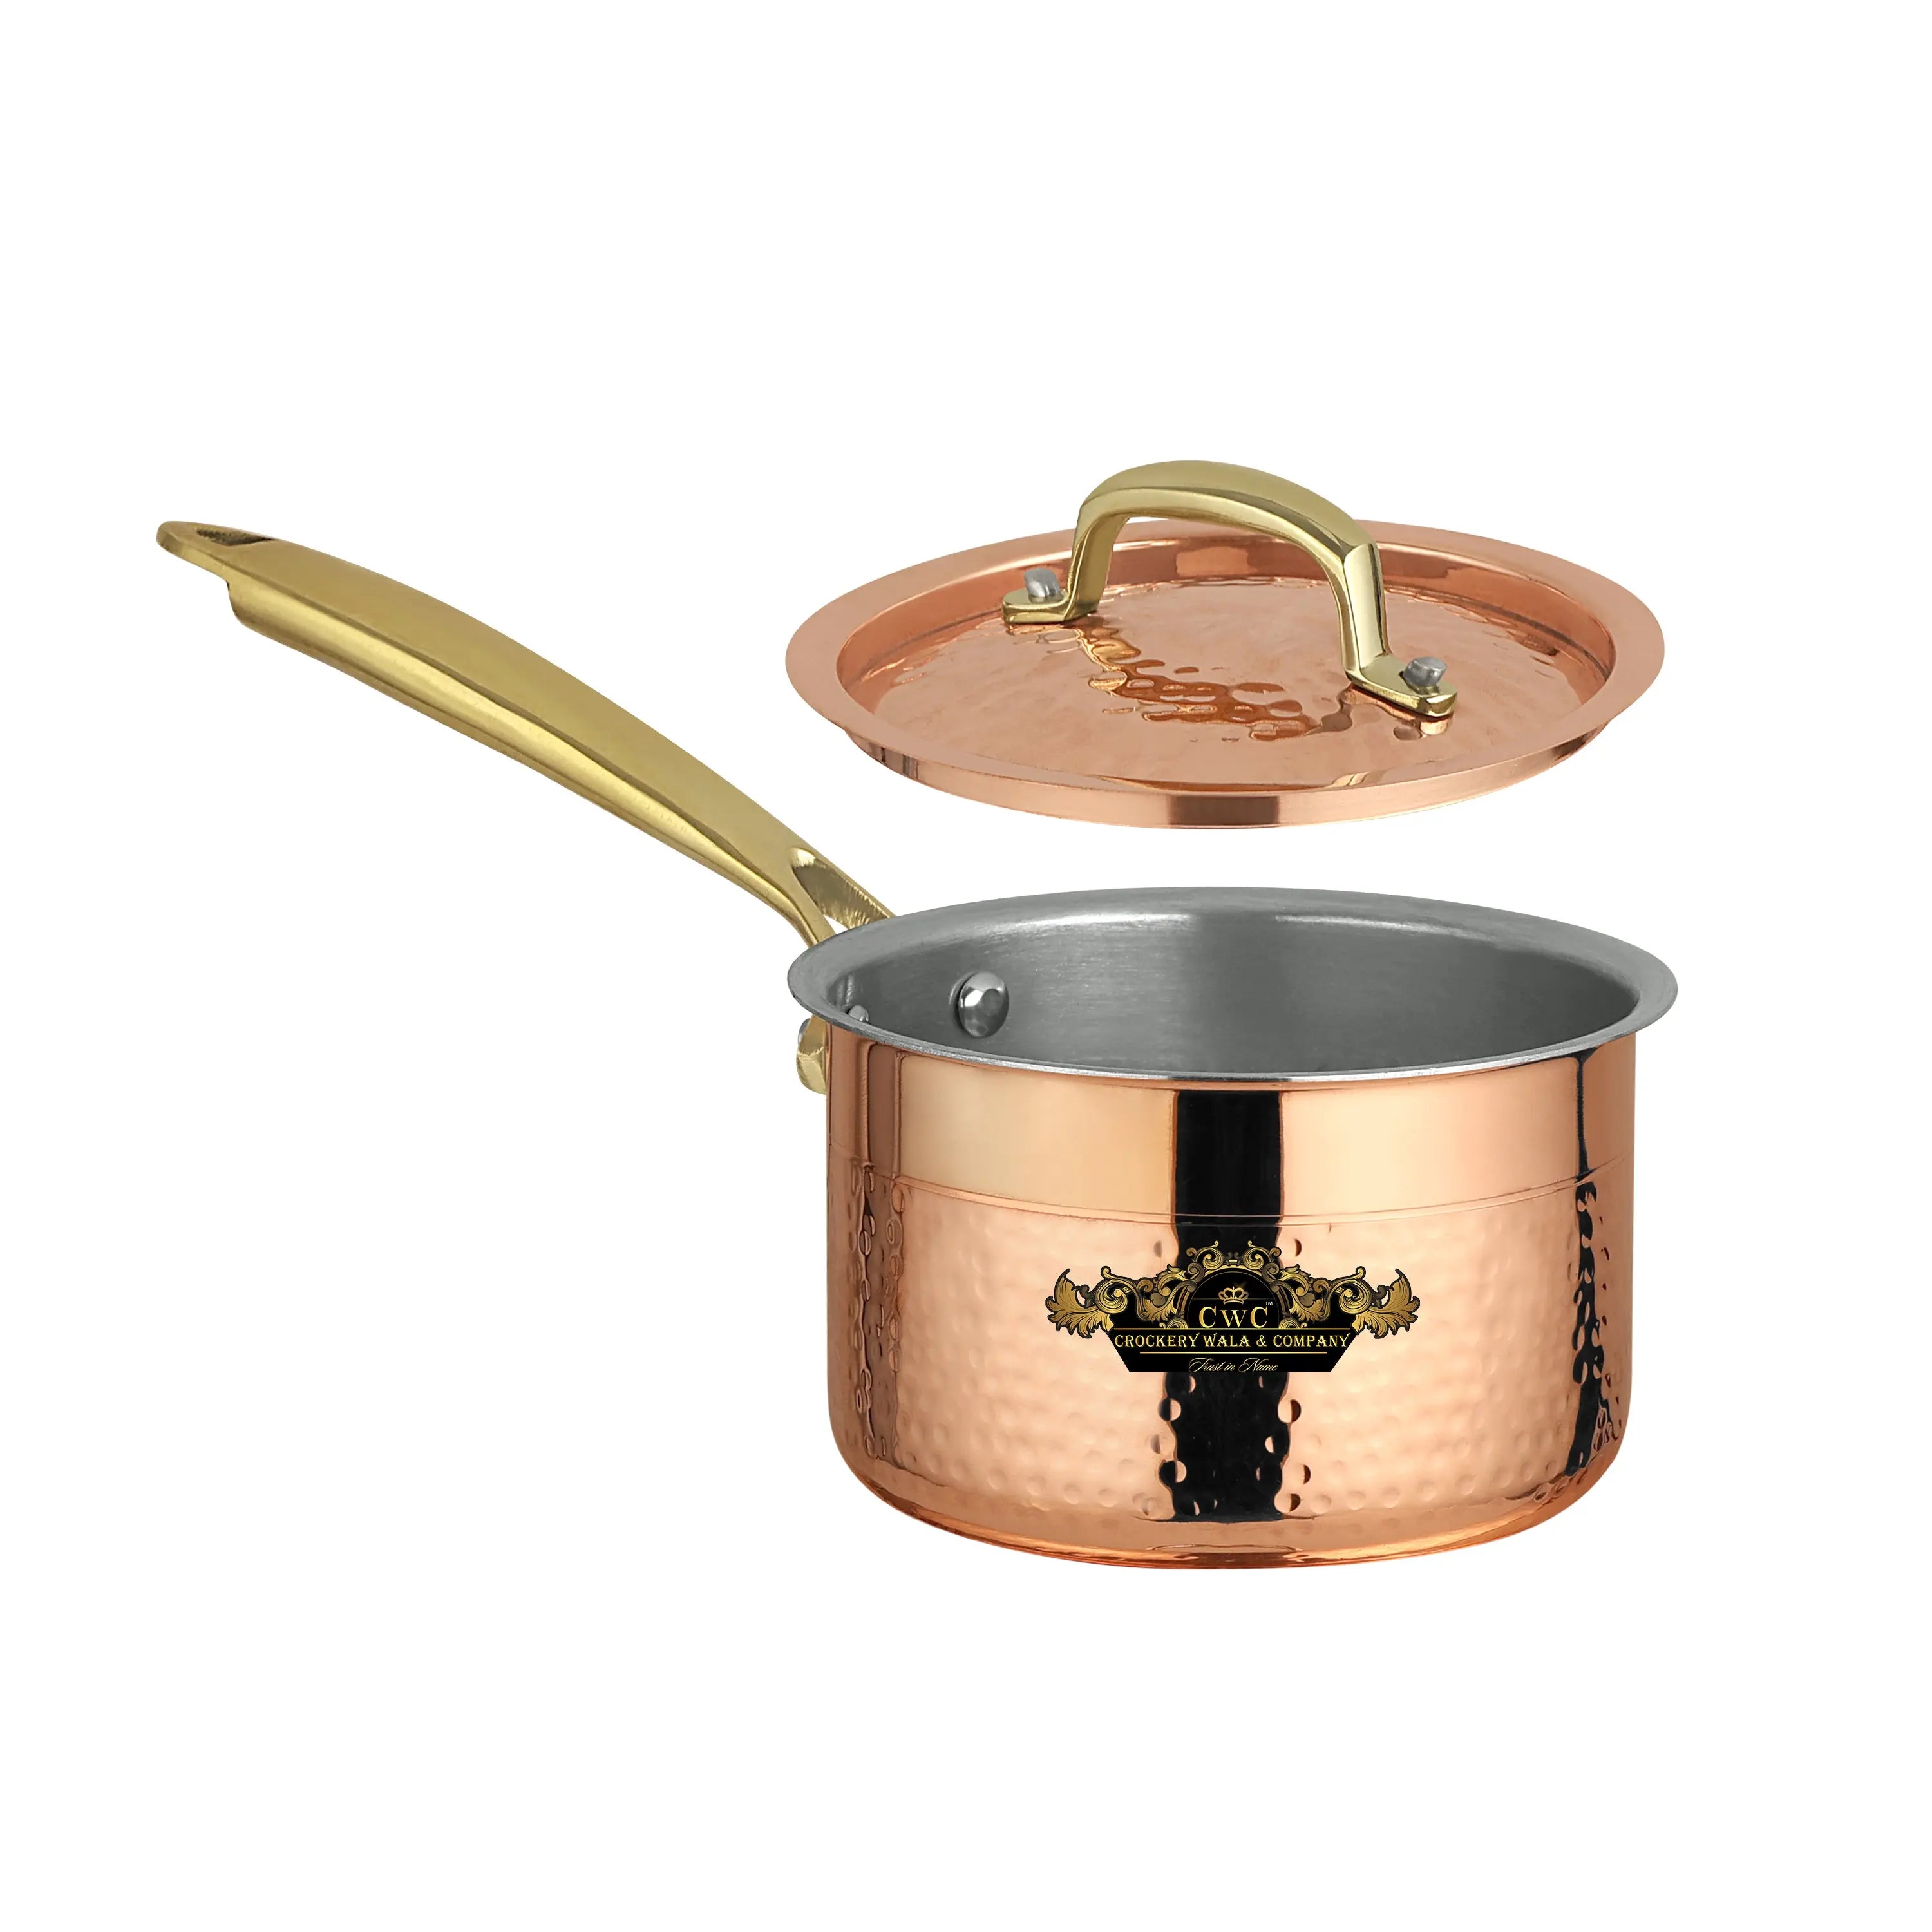 Pure copper sauce pan with kalai and lid hammered finish premium look CROCKERY WALA AND COMPANY